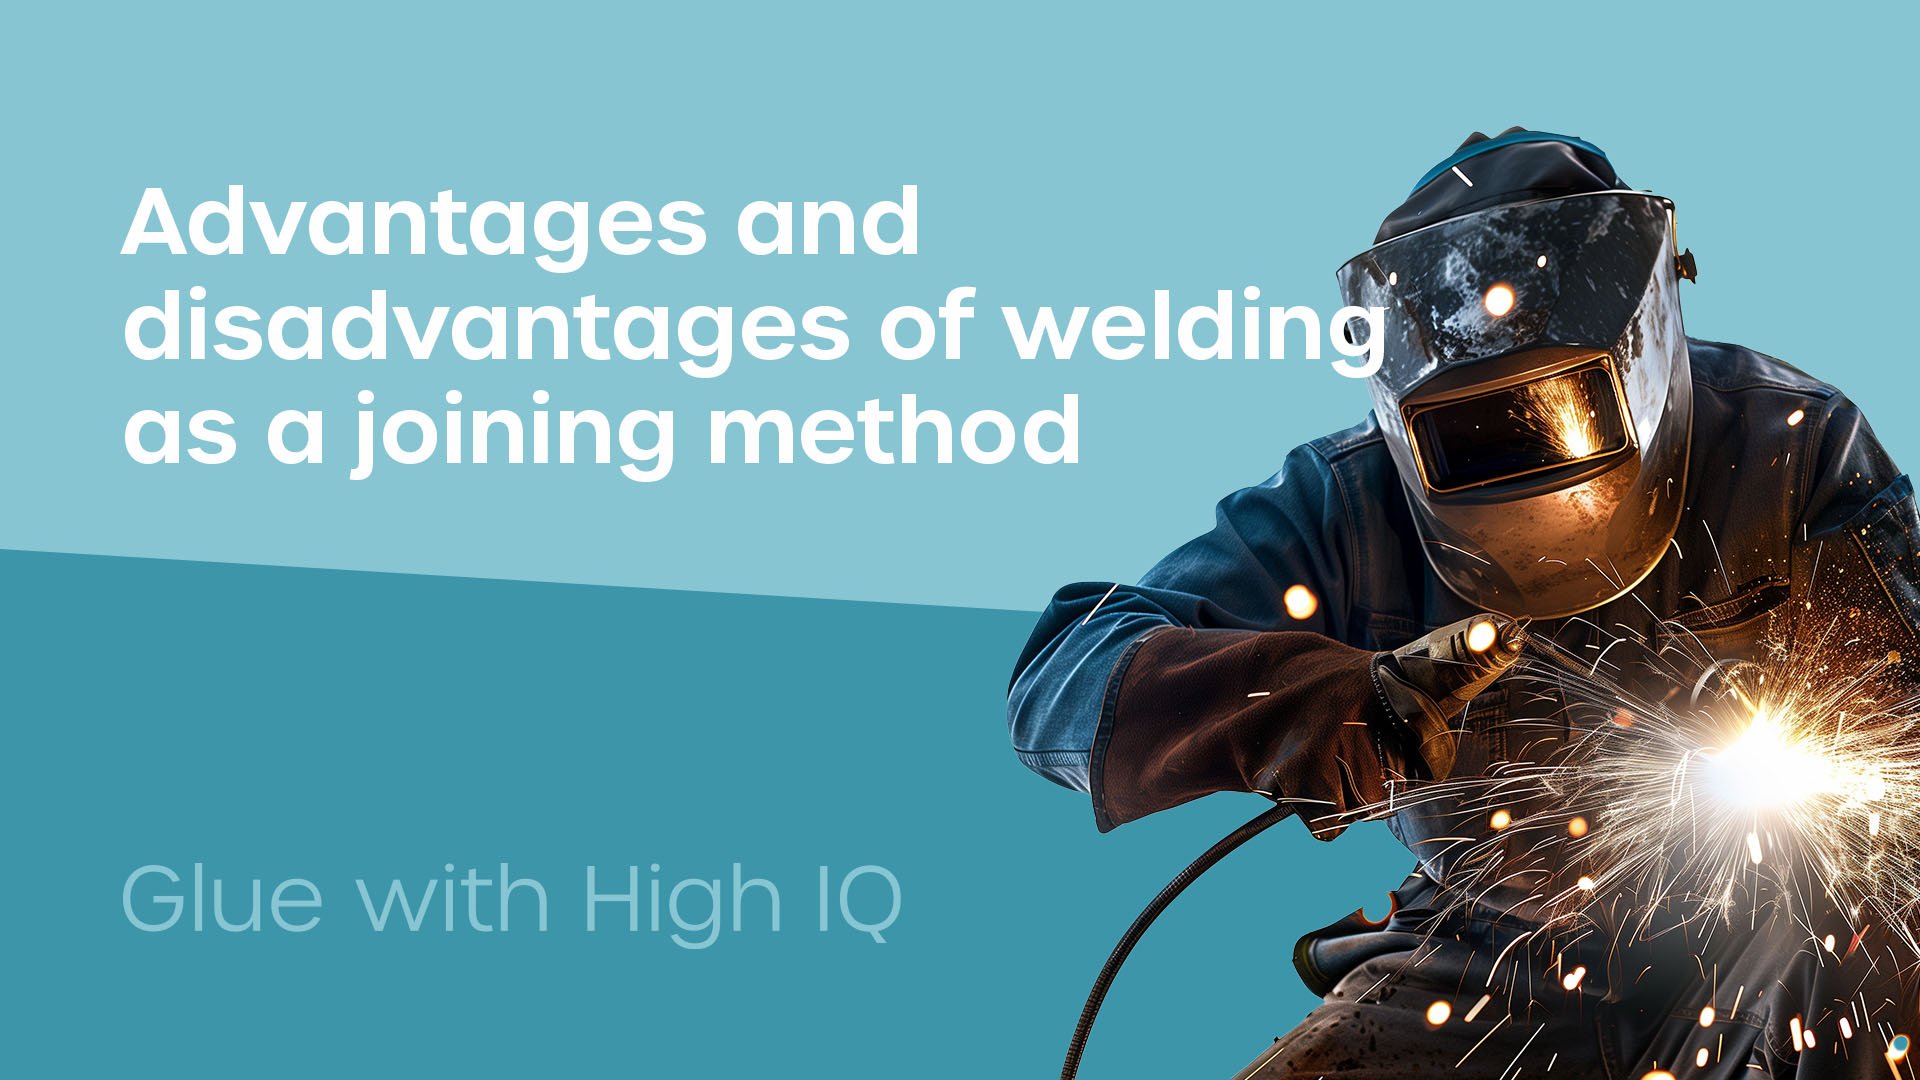 Advantages and disadvantages of welding as a joining method